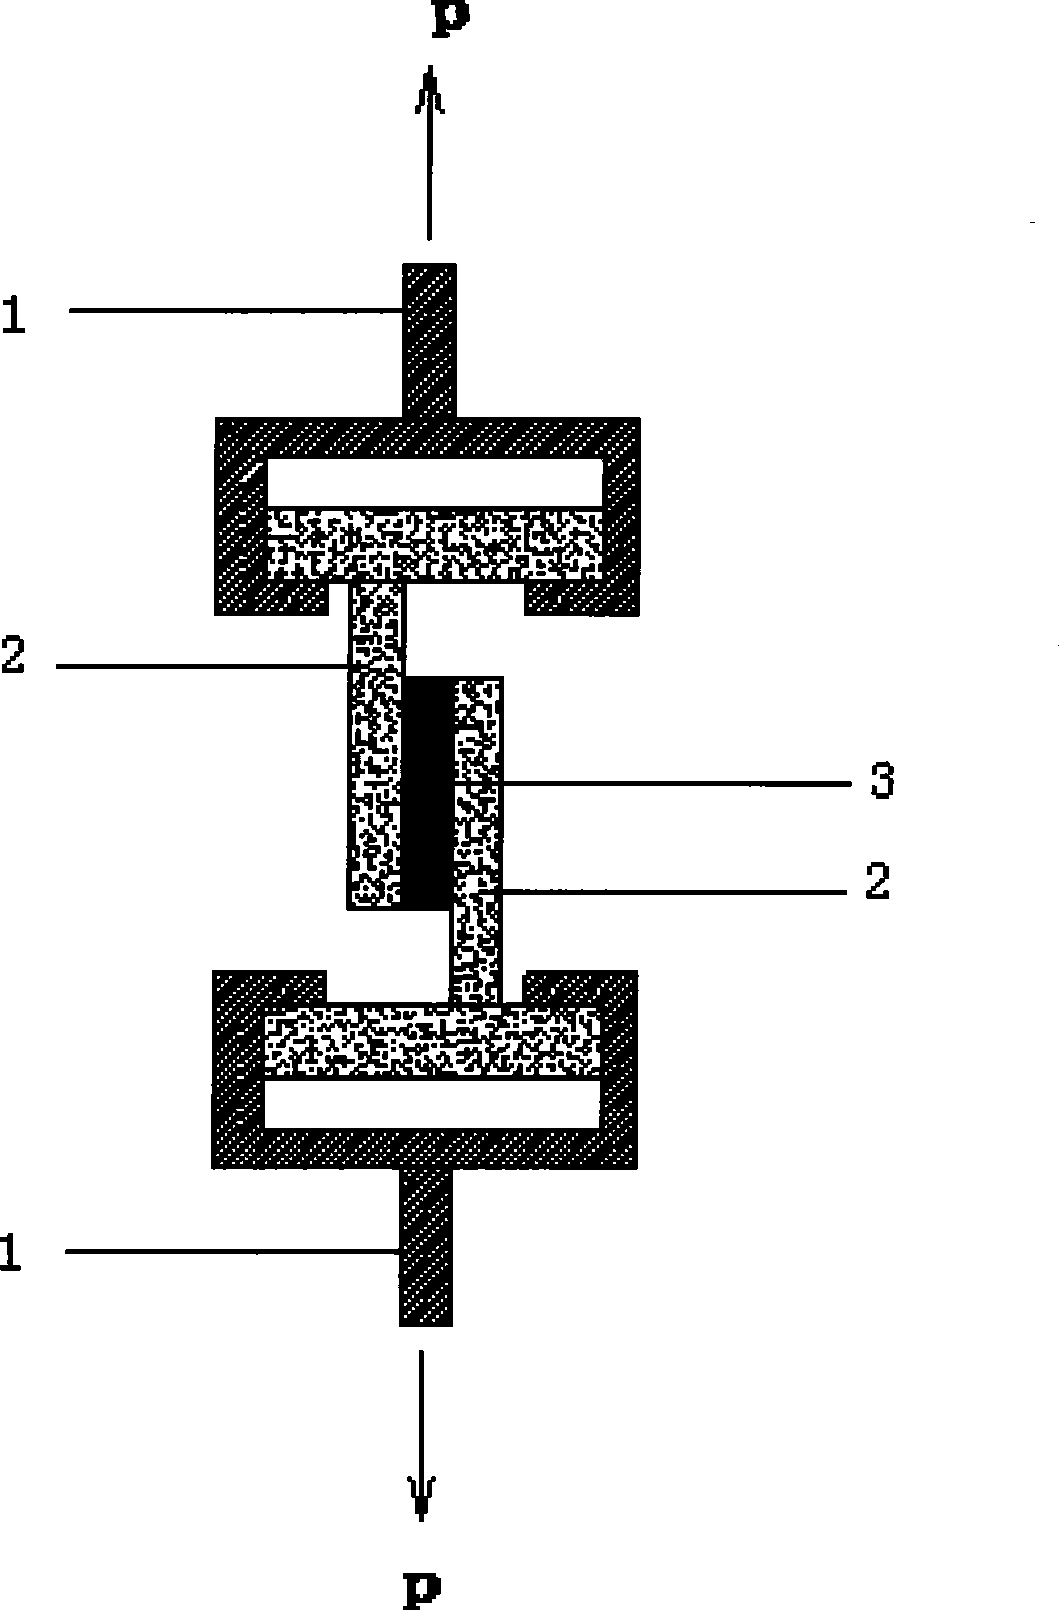 Test method for shearing strength of fluid sealant and bonded substrate bonding sample interface